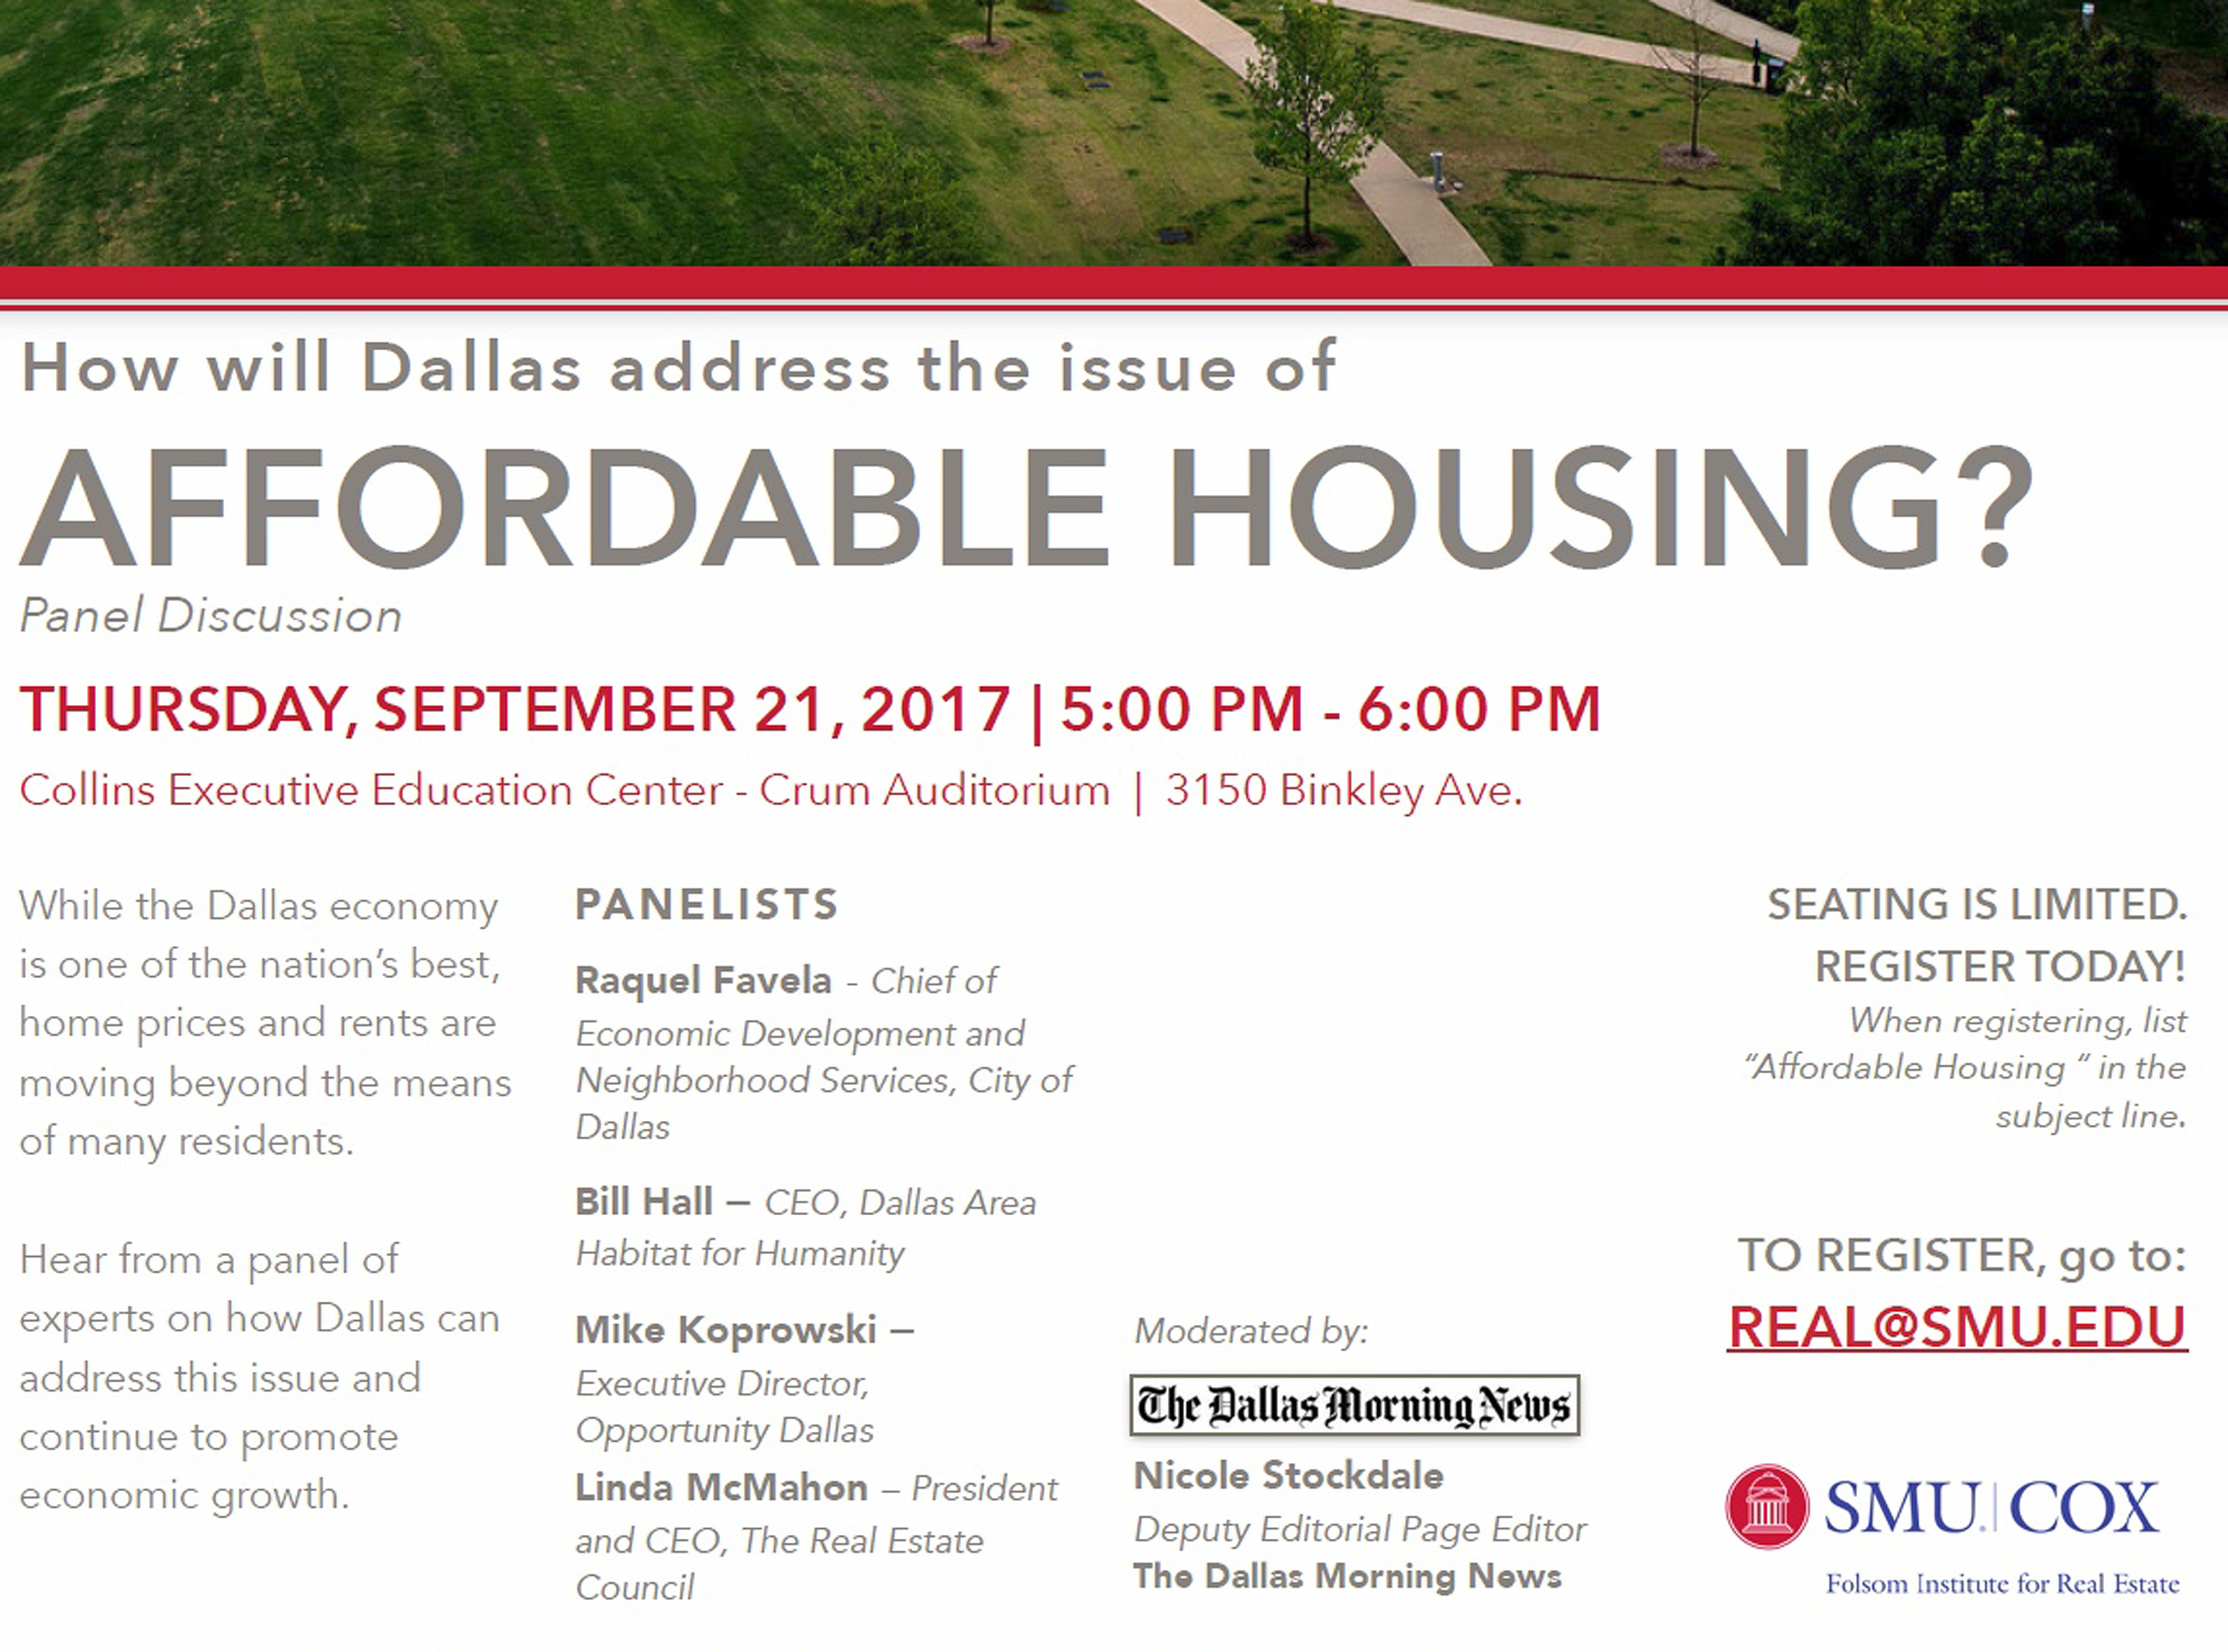 Affordable Housing Discussion